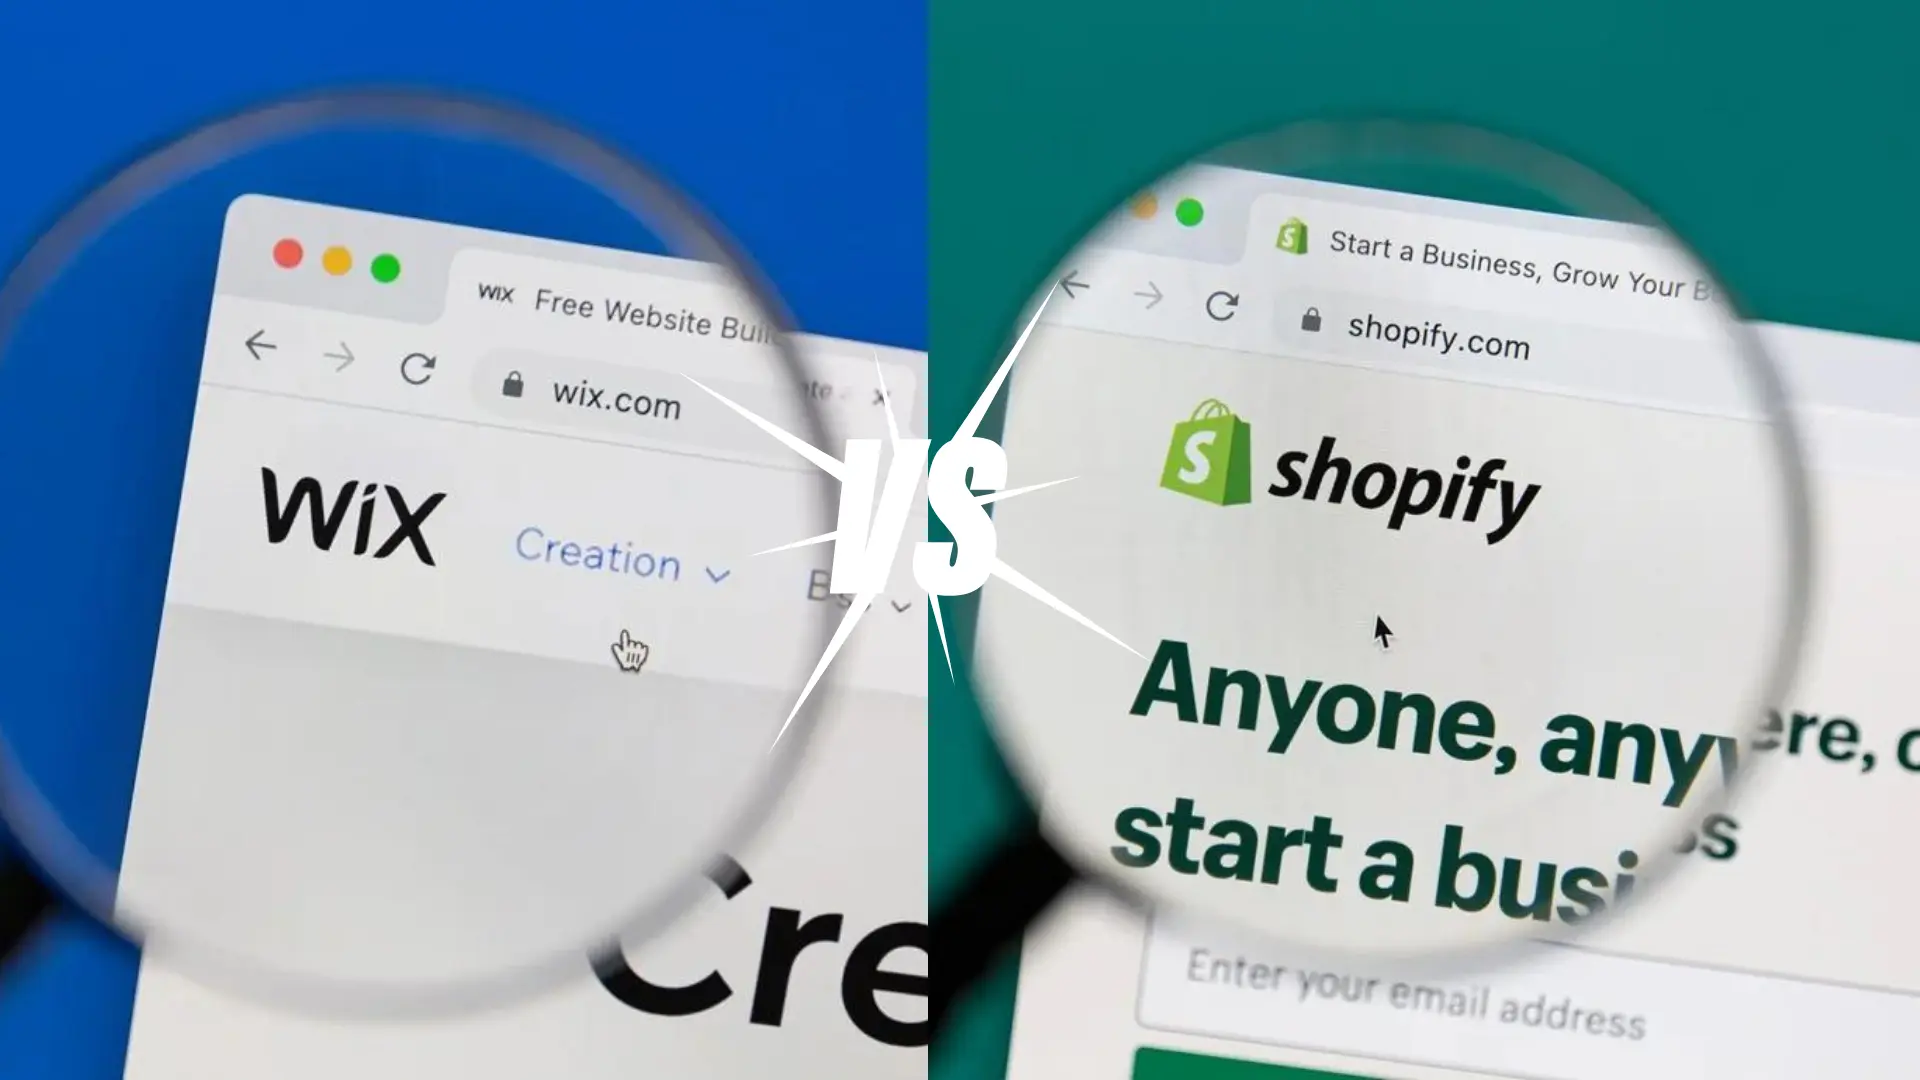 Split image comparing Wix and Shopify web pages magnified, symbolizing ecommerce platform choices